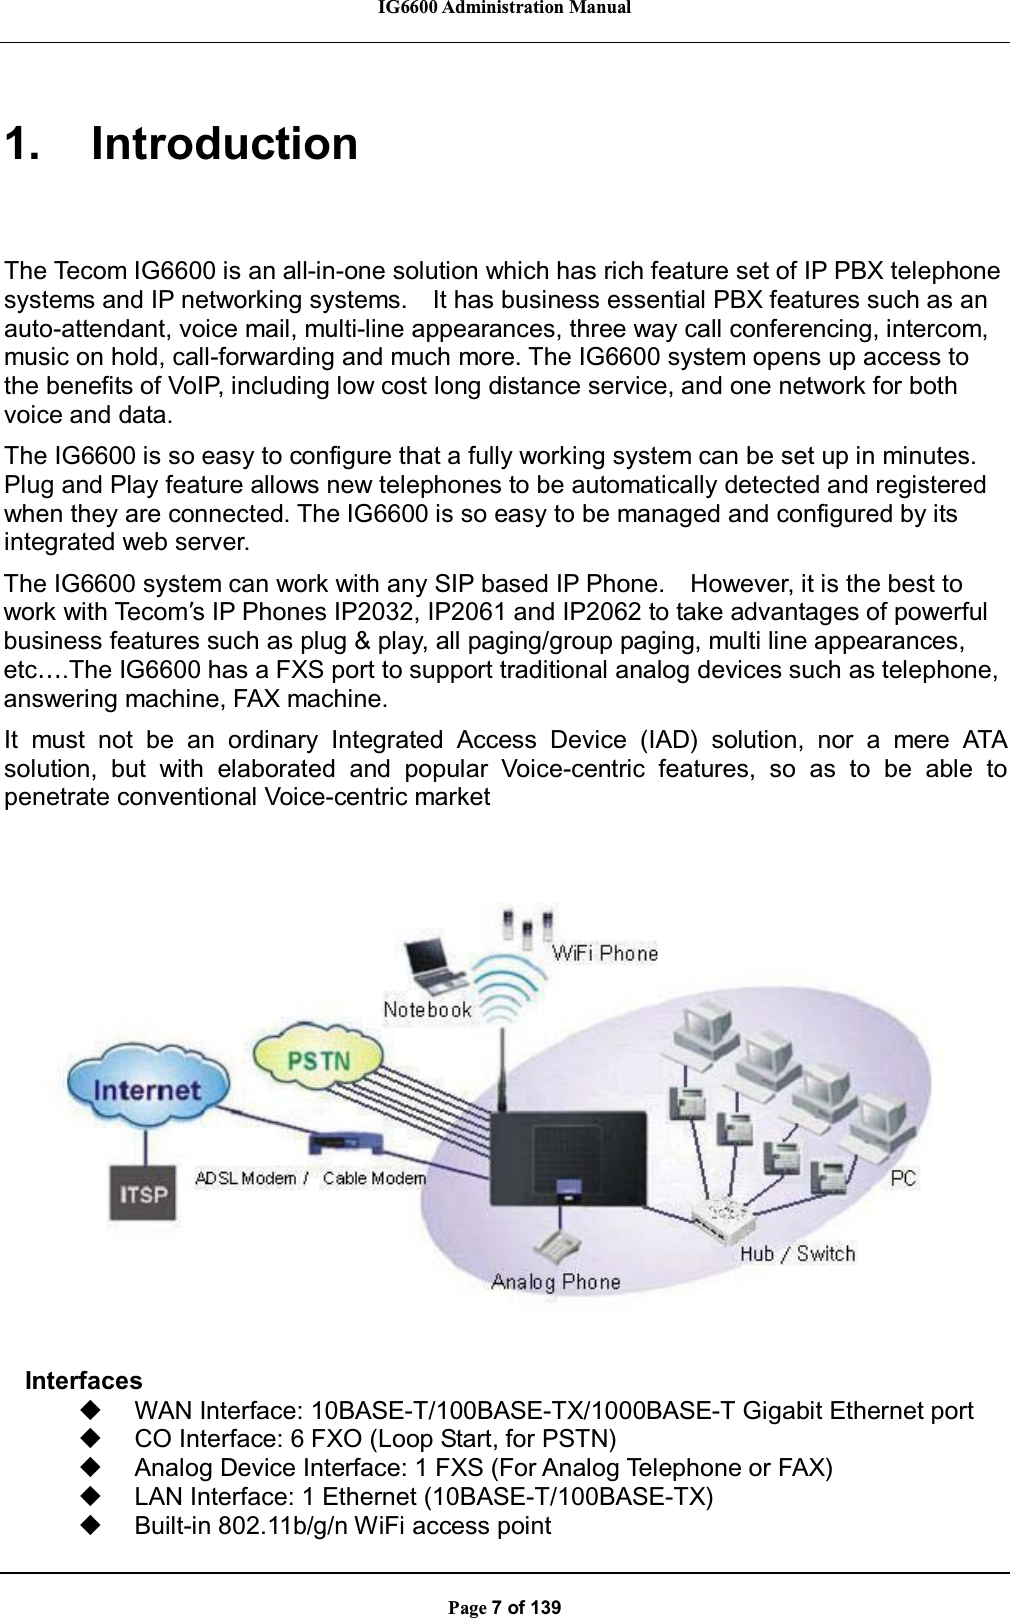 IG6600 Administration ManualPage 7 of 1391. IntroductionThe Tecom IG6600 is an all-in-one solution which has rich feature set of IP PBX telephonesystems and IP networking systems. It has business essential PBX features such as anauto-attendant, voice mail, multi-line appearances, three way call conferencing, intercom,music on hold, call-forwarding and much more. The IG6600 system opens up access tothe benefits of VoIP, including low cost long distance service, and one network for bothvoice and data.The IG6600 is so easy to configure that a fully working system can be set up in minutes.Plug and Play feature allows new telephones to be automatically detected and registeredwhen they are connected. The IG6600 is so easy to be managed and configured by itsintegrated web server.The IG6600 system can work with any SIP based IP Phone. However, it is the best towork with Tecom’s IP Phones IP2032, IP2061 and IP2062 to take advantages of powerfulbusiness features such as plug &amp; play, all paging/group paging, multi line appearances,etc….The IG6600 has a FXS port to support traditional analog devices such as telephone,answering machine, FAX machine.It must not be an ordinary Integrated Access Device (IAD) solution, nor a mere ATAsolution, but with elaborated and popular Voice-centric features, so as to be able topenetrate conventional Voice-centric marketInterfacesWAN Interface: 10BASE-T/100BASE-TX/1000BASE-T Gigabit Ethernet portCO Interface: 6 FXO (Loop Start, for PSTN)Analog Device Interface: 1 FXS (For Analog Telephone or FAX)LAN Interface: 1 Ethernet (10BASE-T/100BASE-TX)Built-in 802.11b/g/n WiFi access point